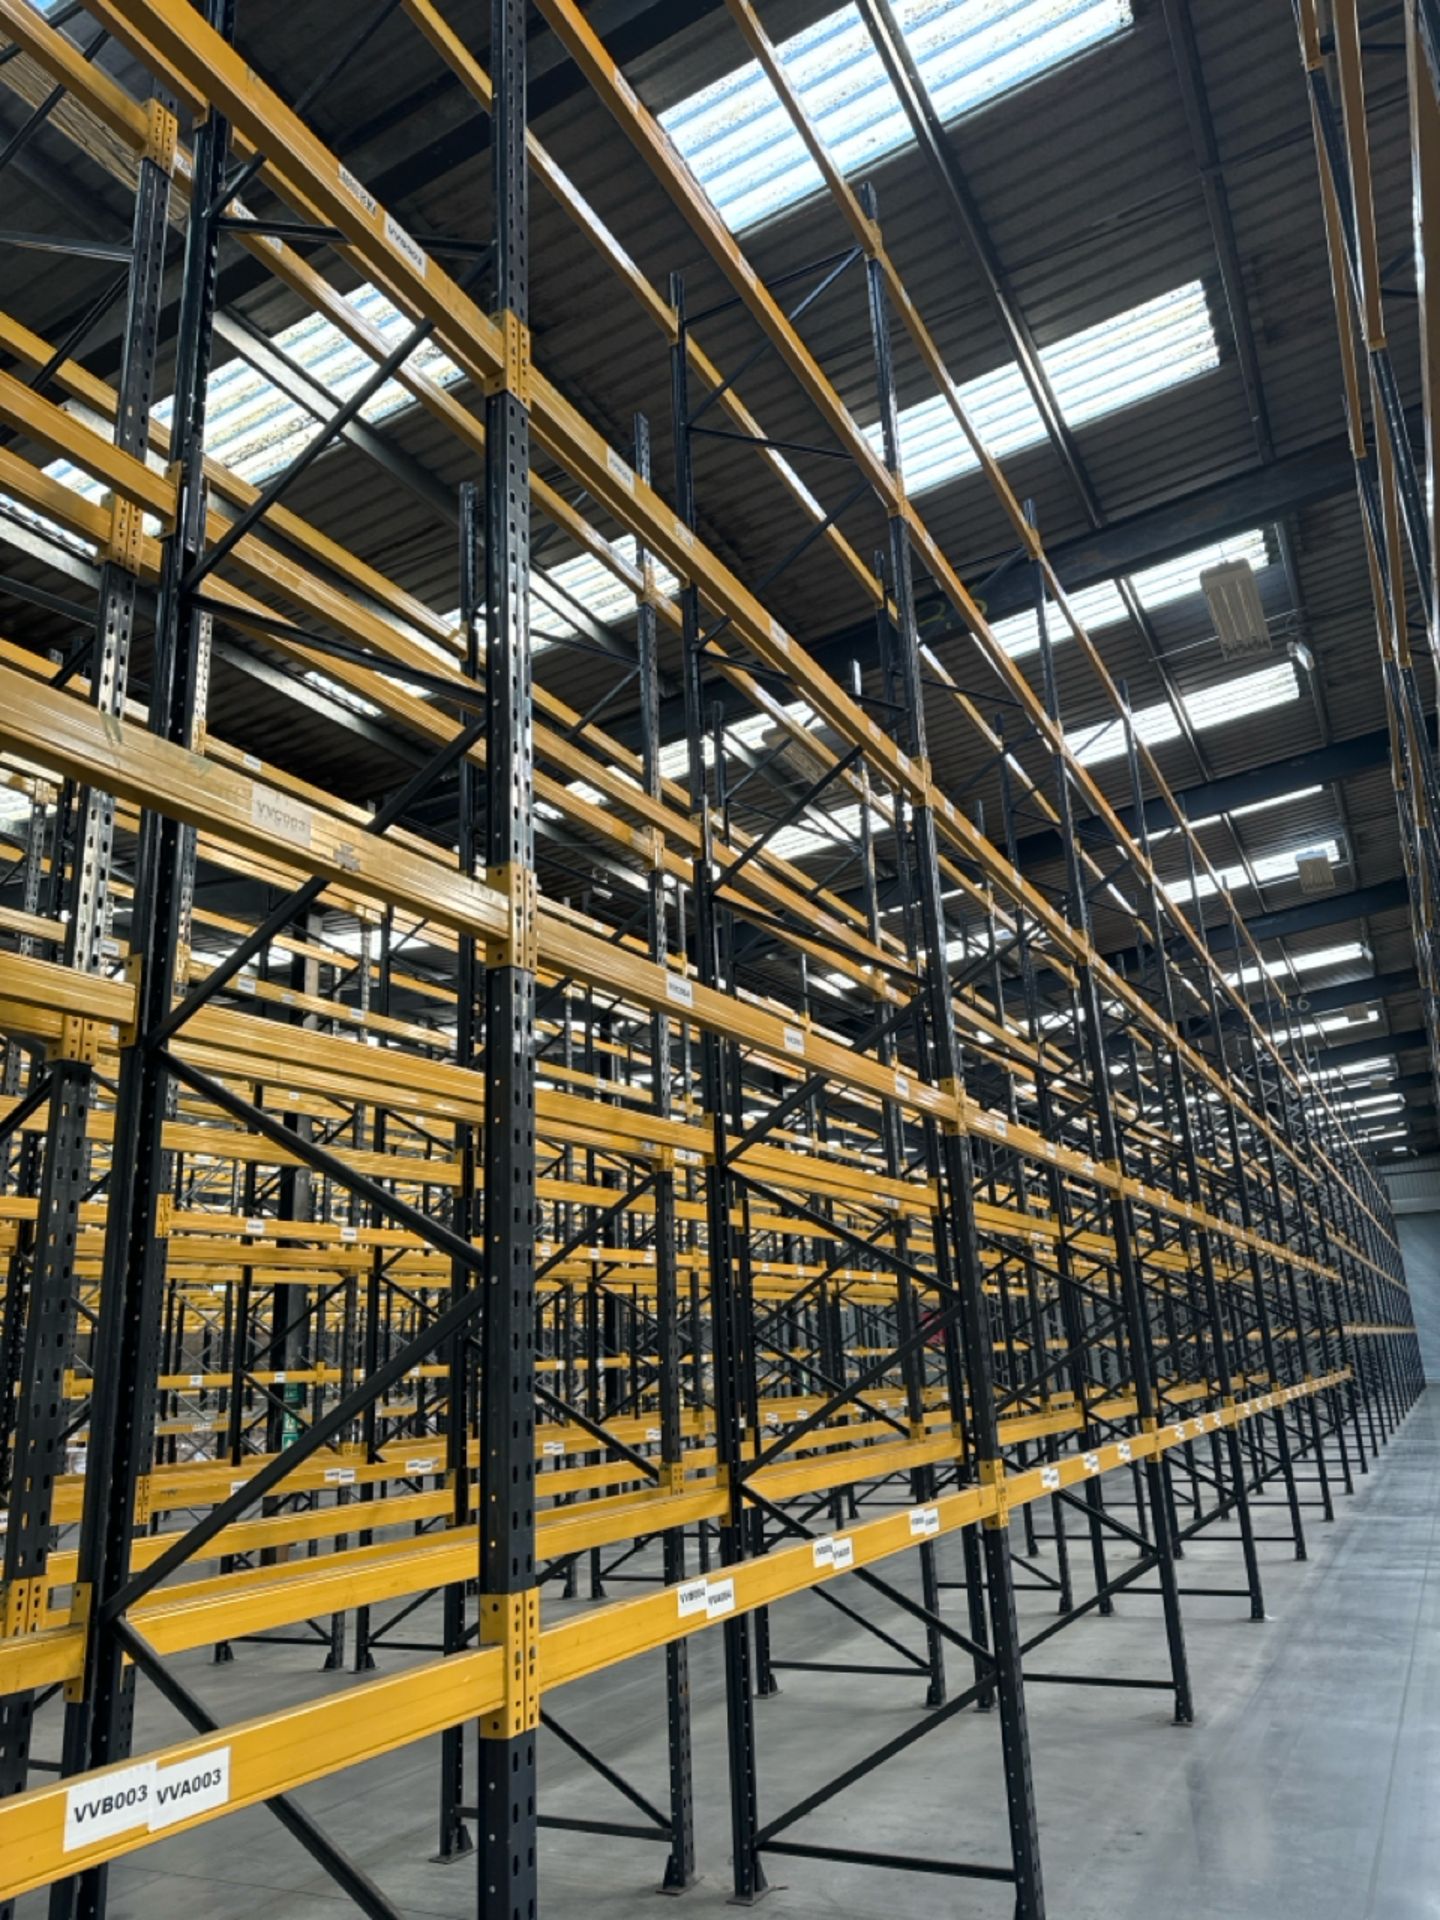 40 Bays Of Back To Back Boltless Industrial Pallet - Image 4 of 8